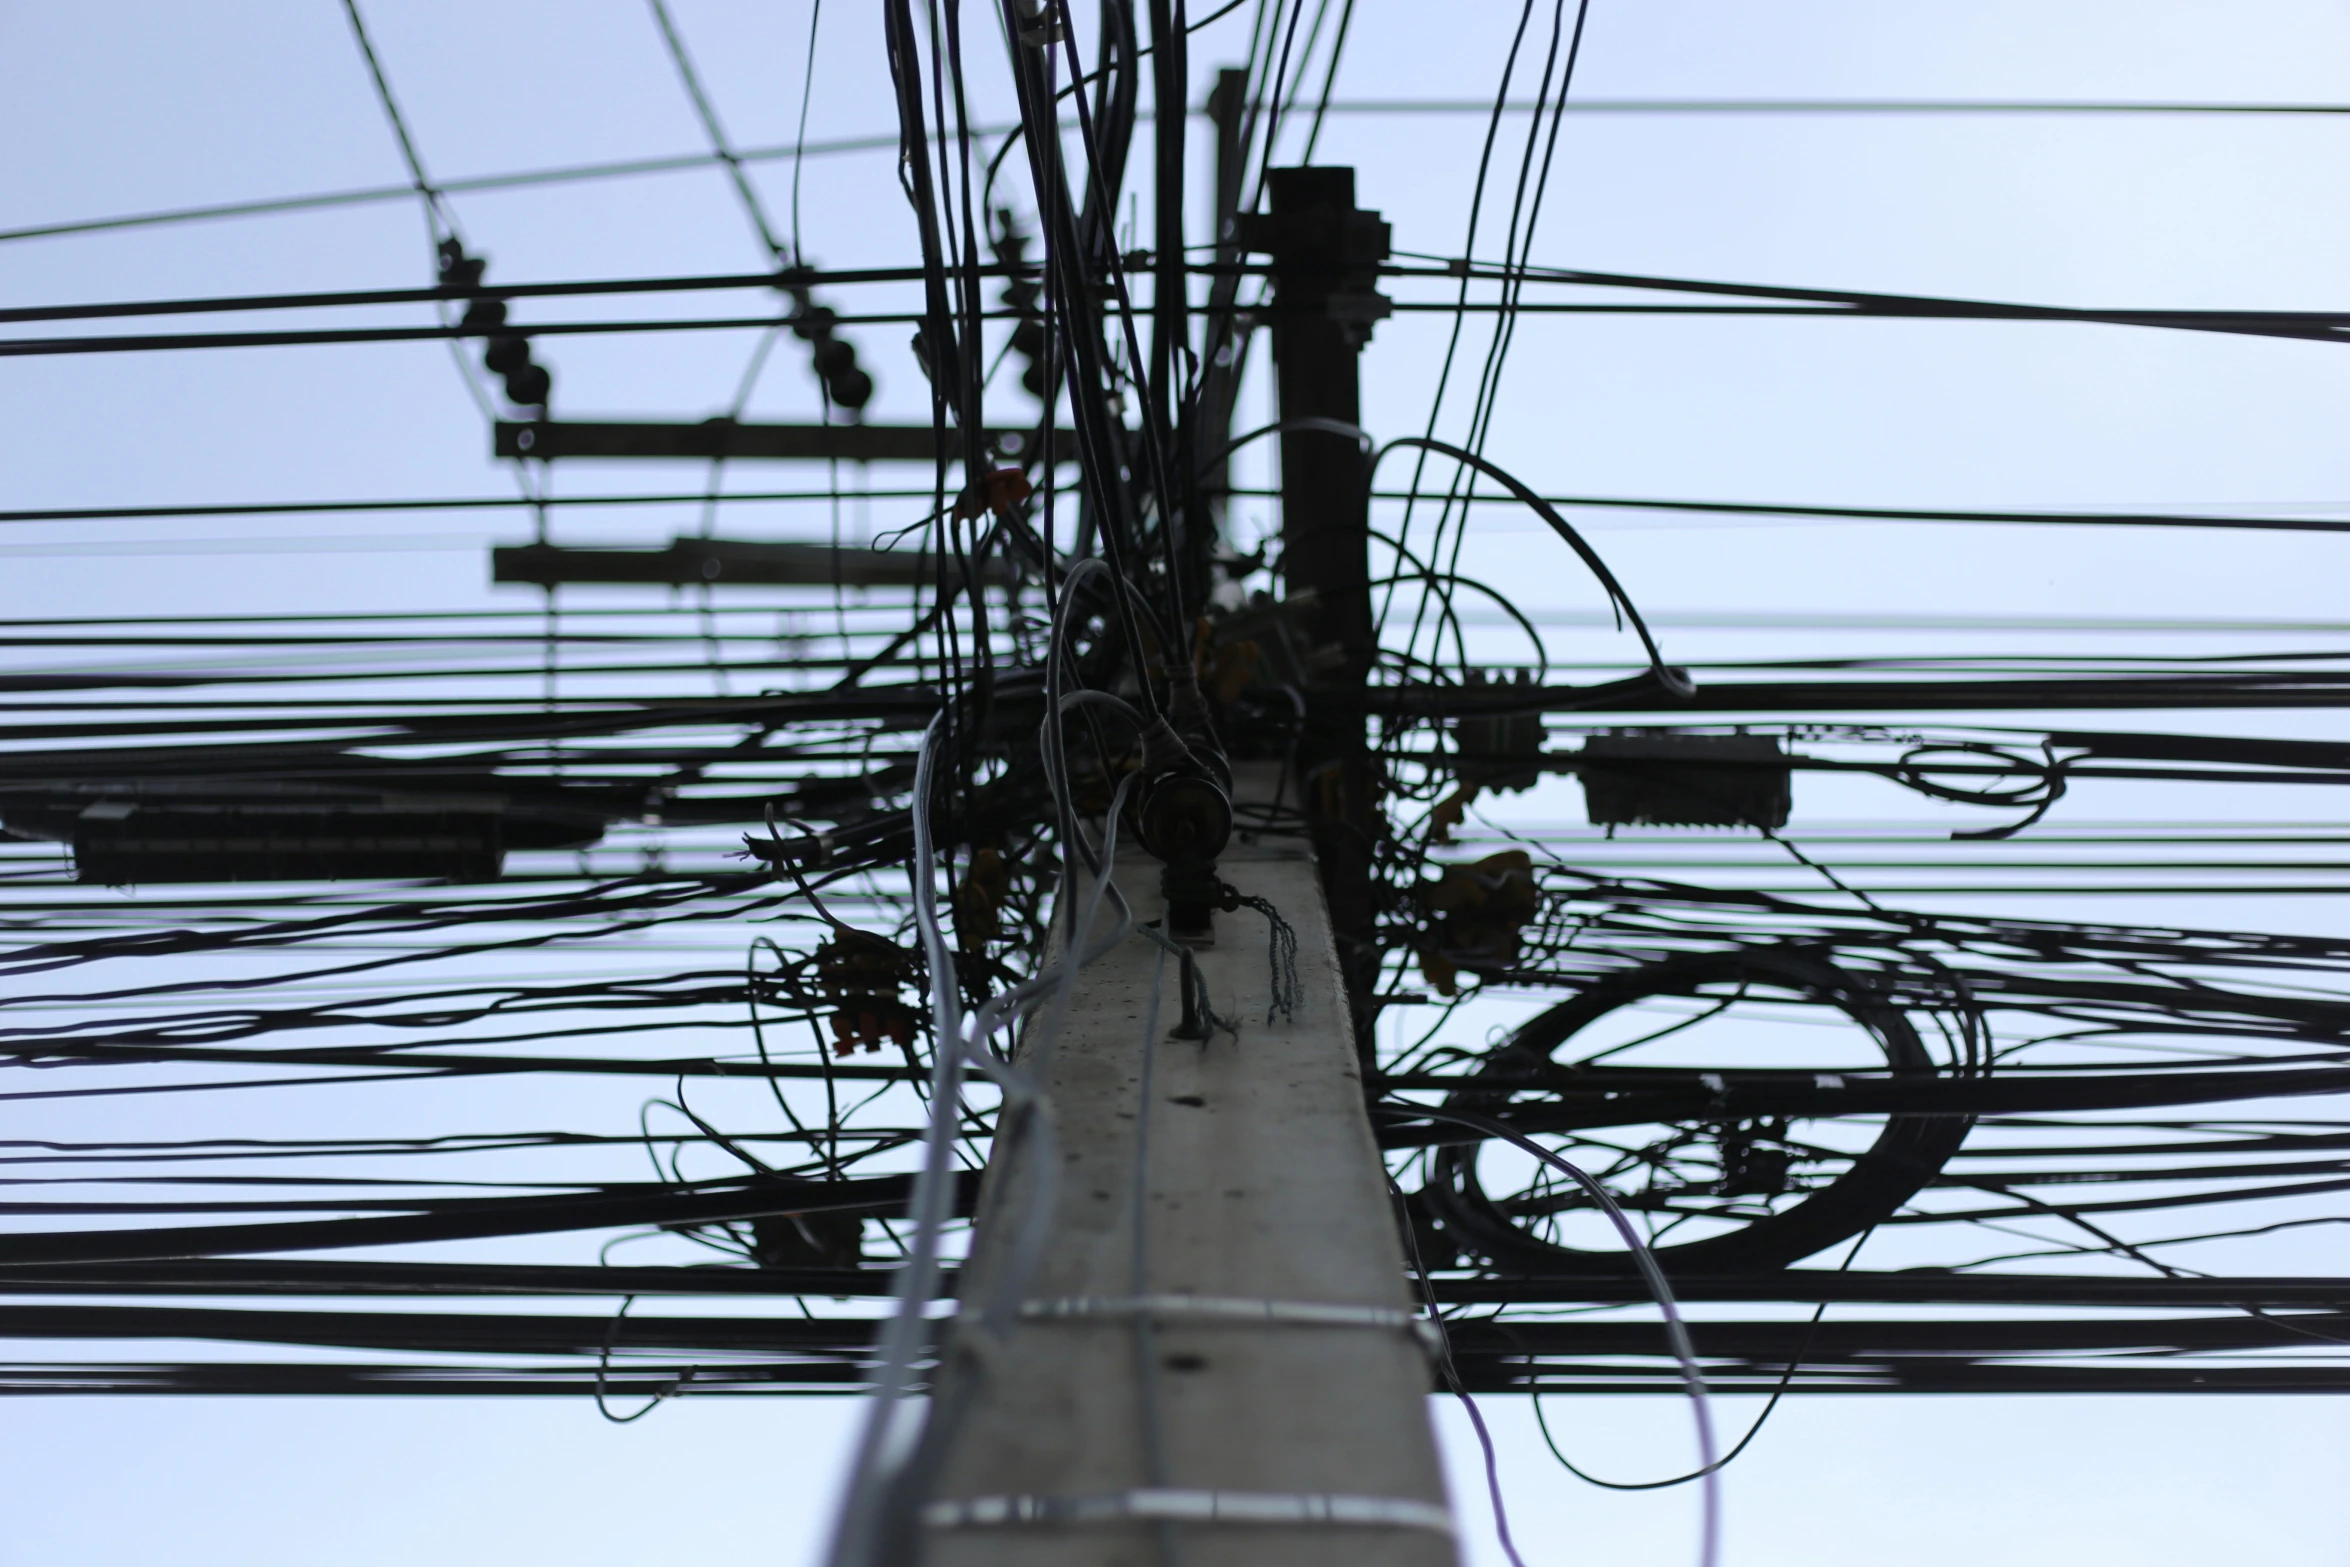 a close up view of the electrical wires and wires